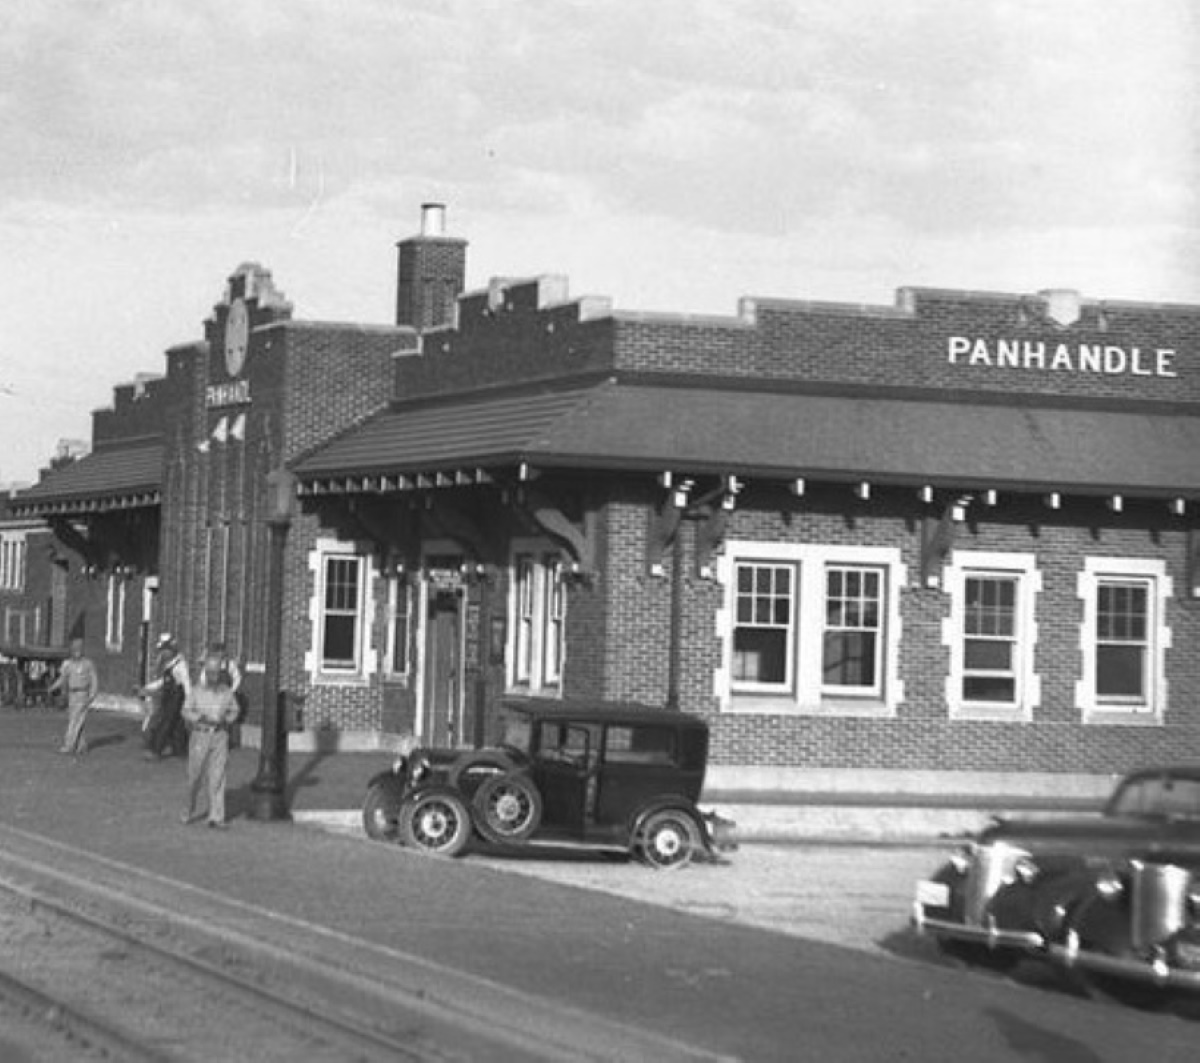 Train Station in Panhandle Texas 1940s